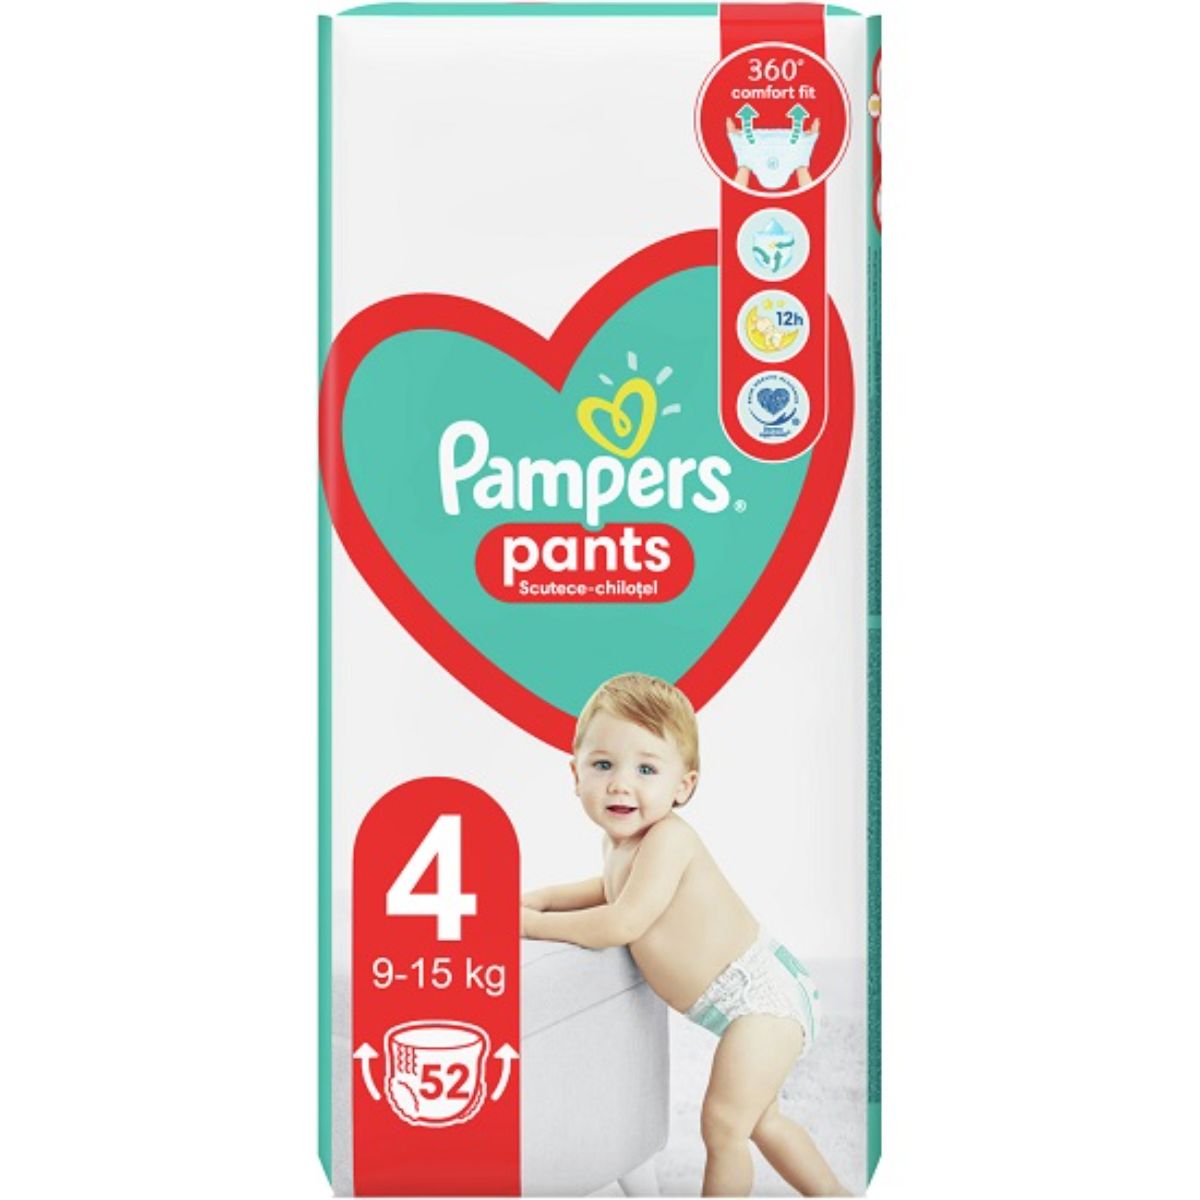 Scutece Pampers, 4 Chilotel Act Baby 9-15 kg, 52 buc